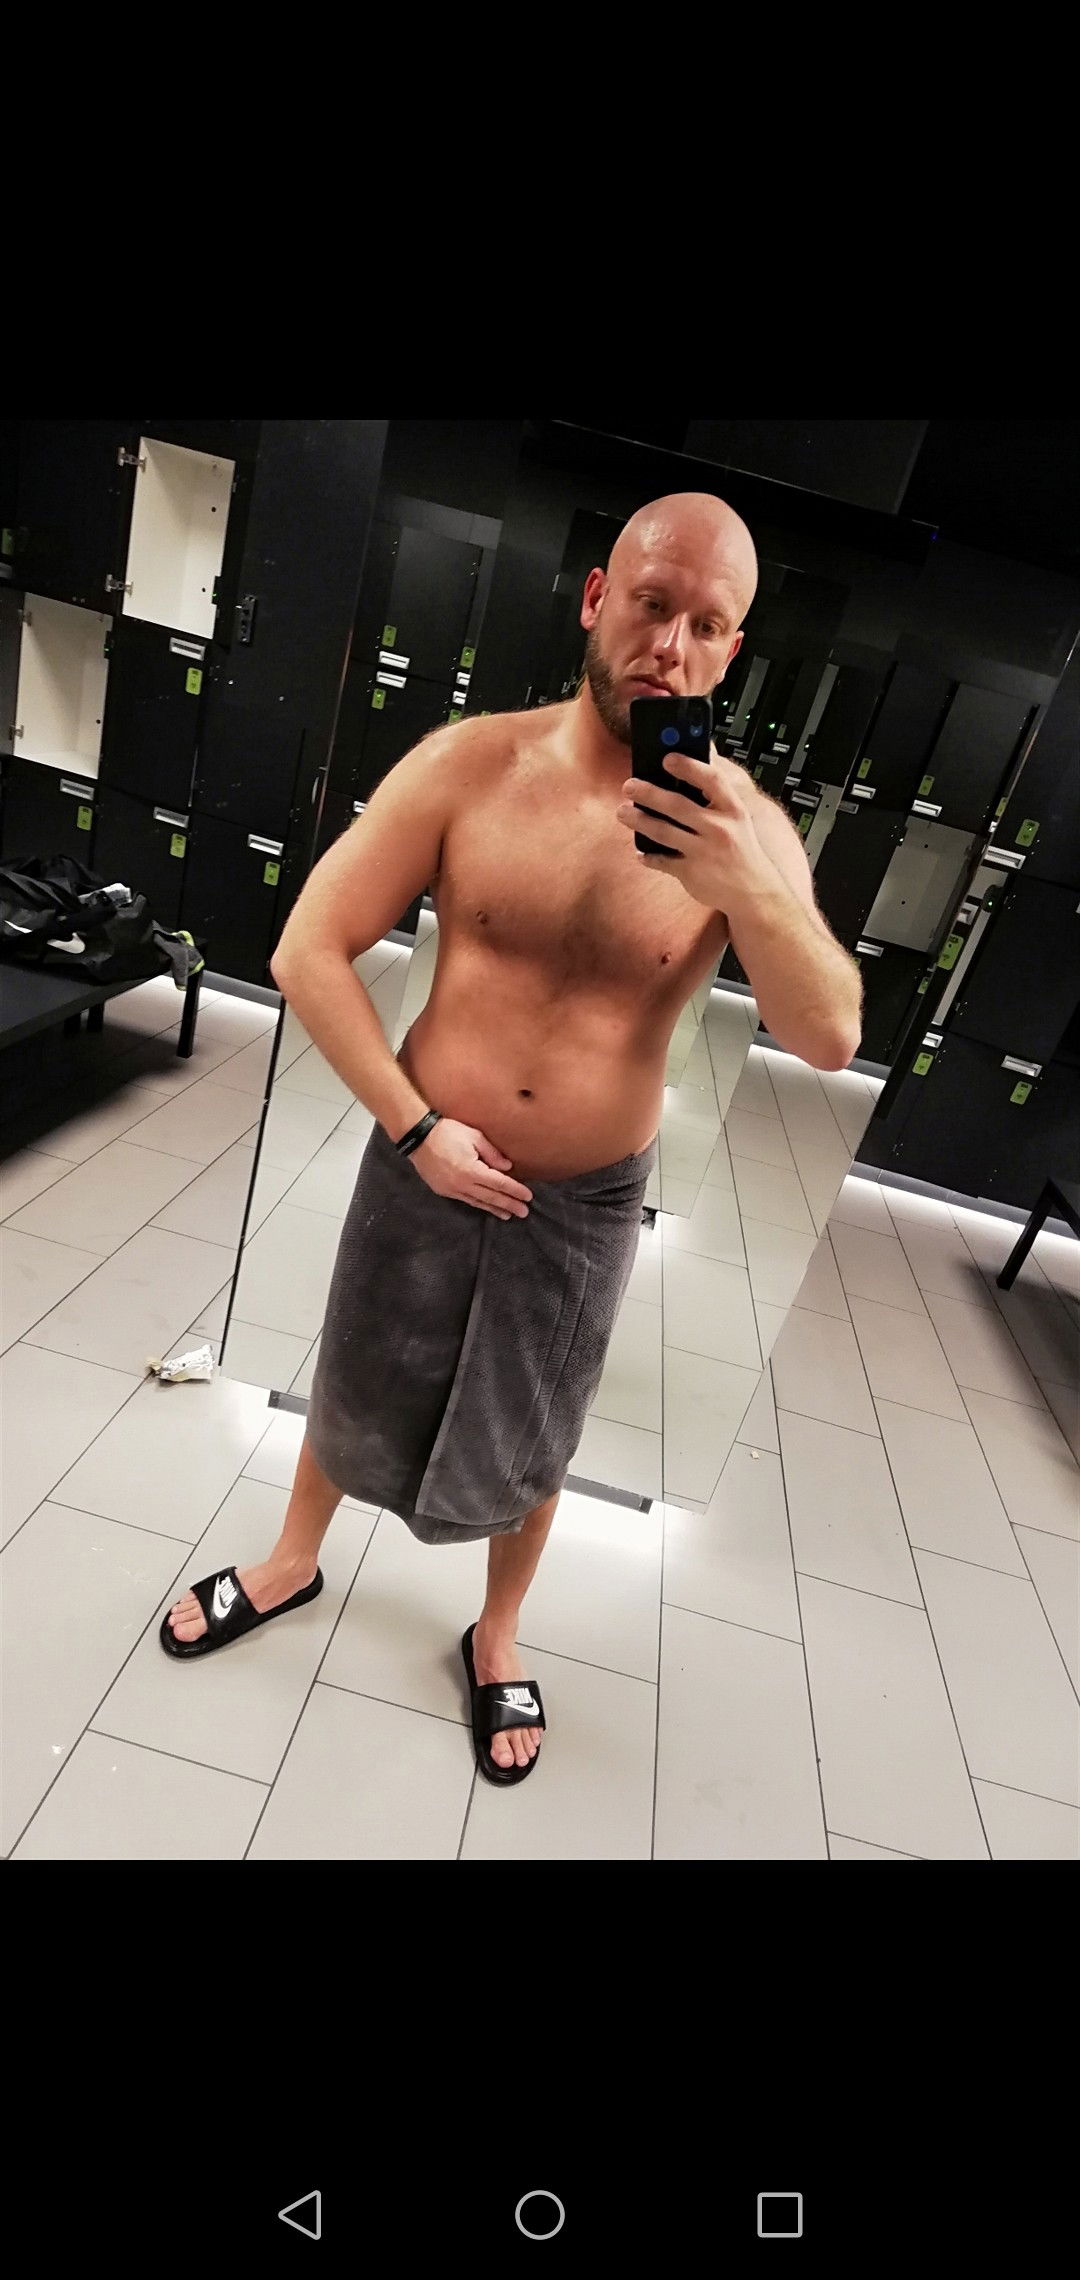 Watch the Photo by bald-butch with the username @bald-butch, posted on March 31, 2019. The post is about the topic Gay Exhibitionists.